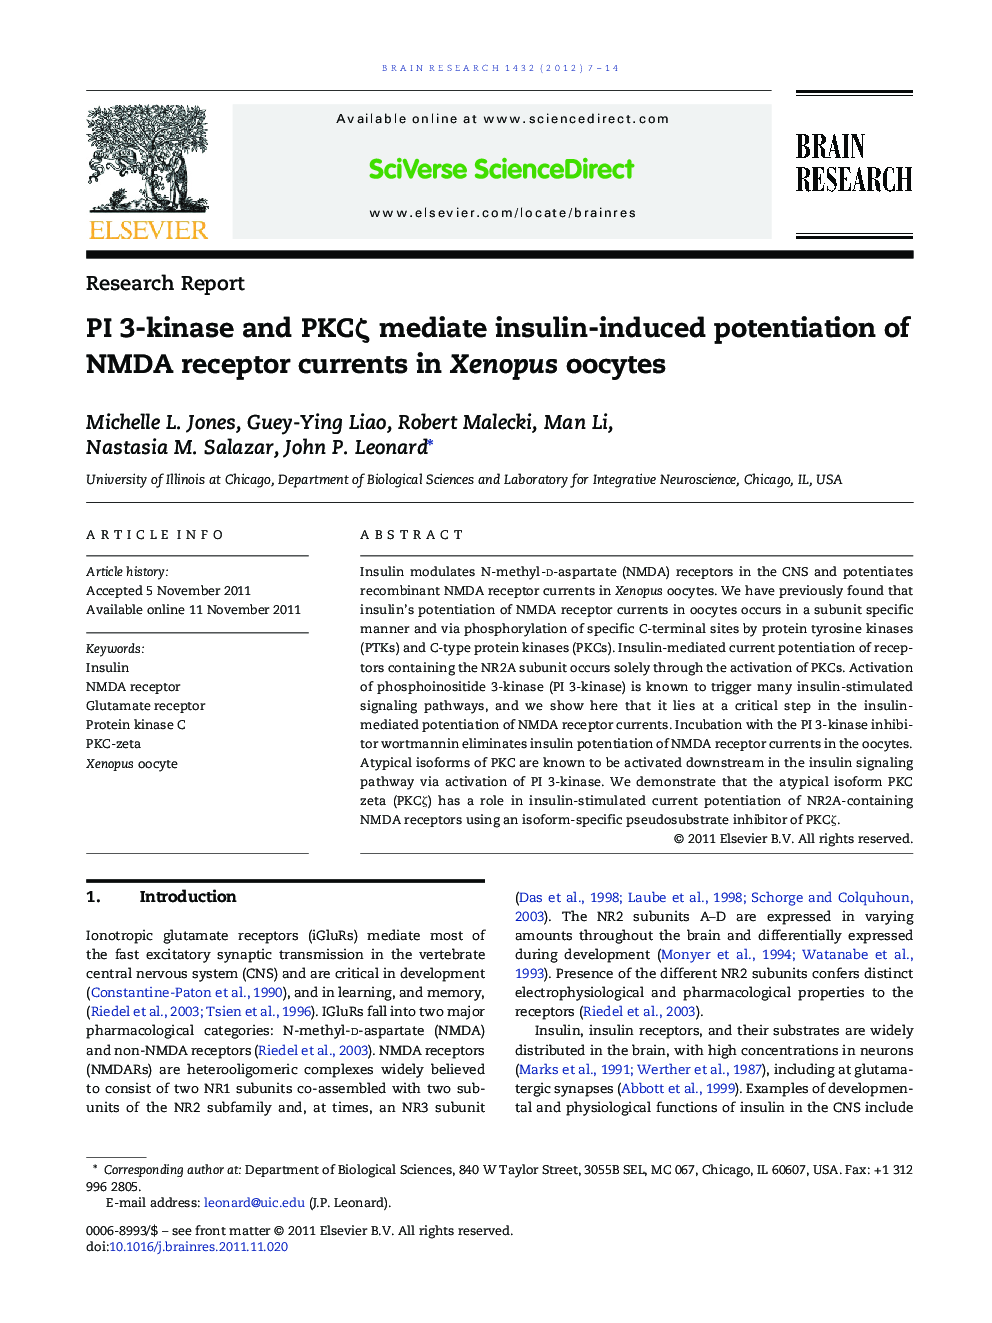 PI 3-kinase and PKCζ mediate insulin-induced potentiation of NMDA receptor currents in Xenopus oocytes